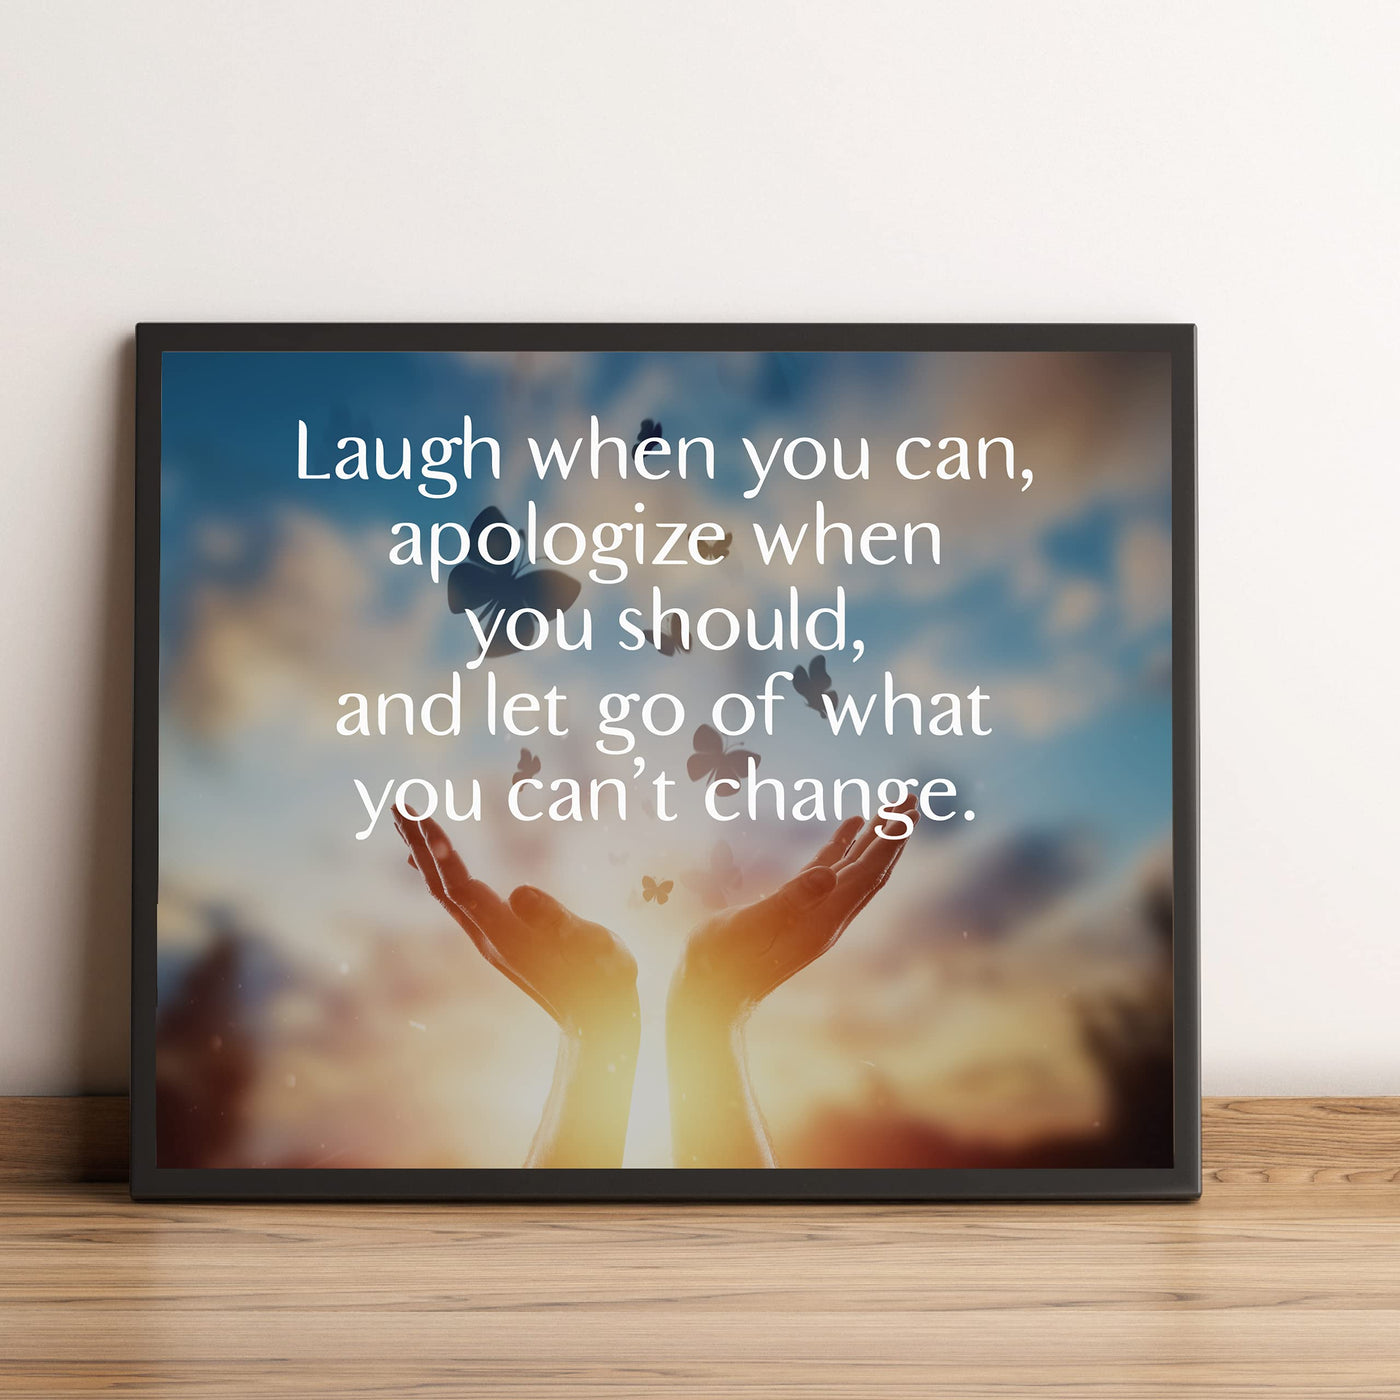 Laugh When You Can-Let Go of What You Can't Change-Inspirational Quotes Wall Sign -10 x 8" Motivational Wall Art Print w/Butterfly Images-Ready to Frame. Home-Office-School Decor. Great Advice!